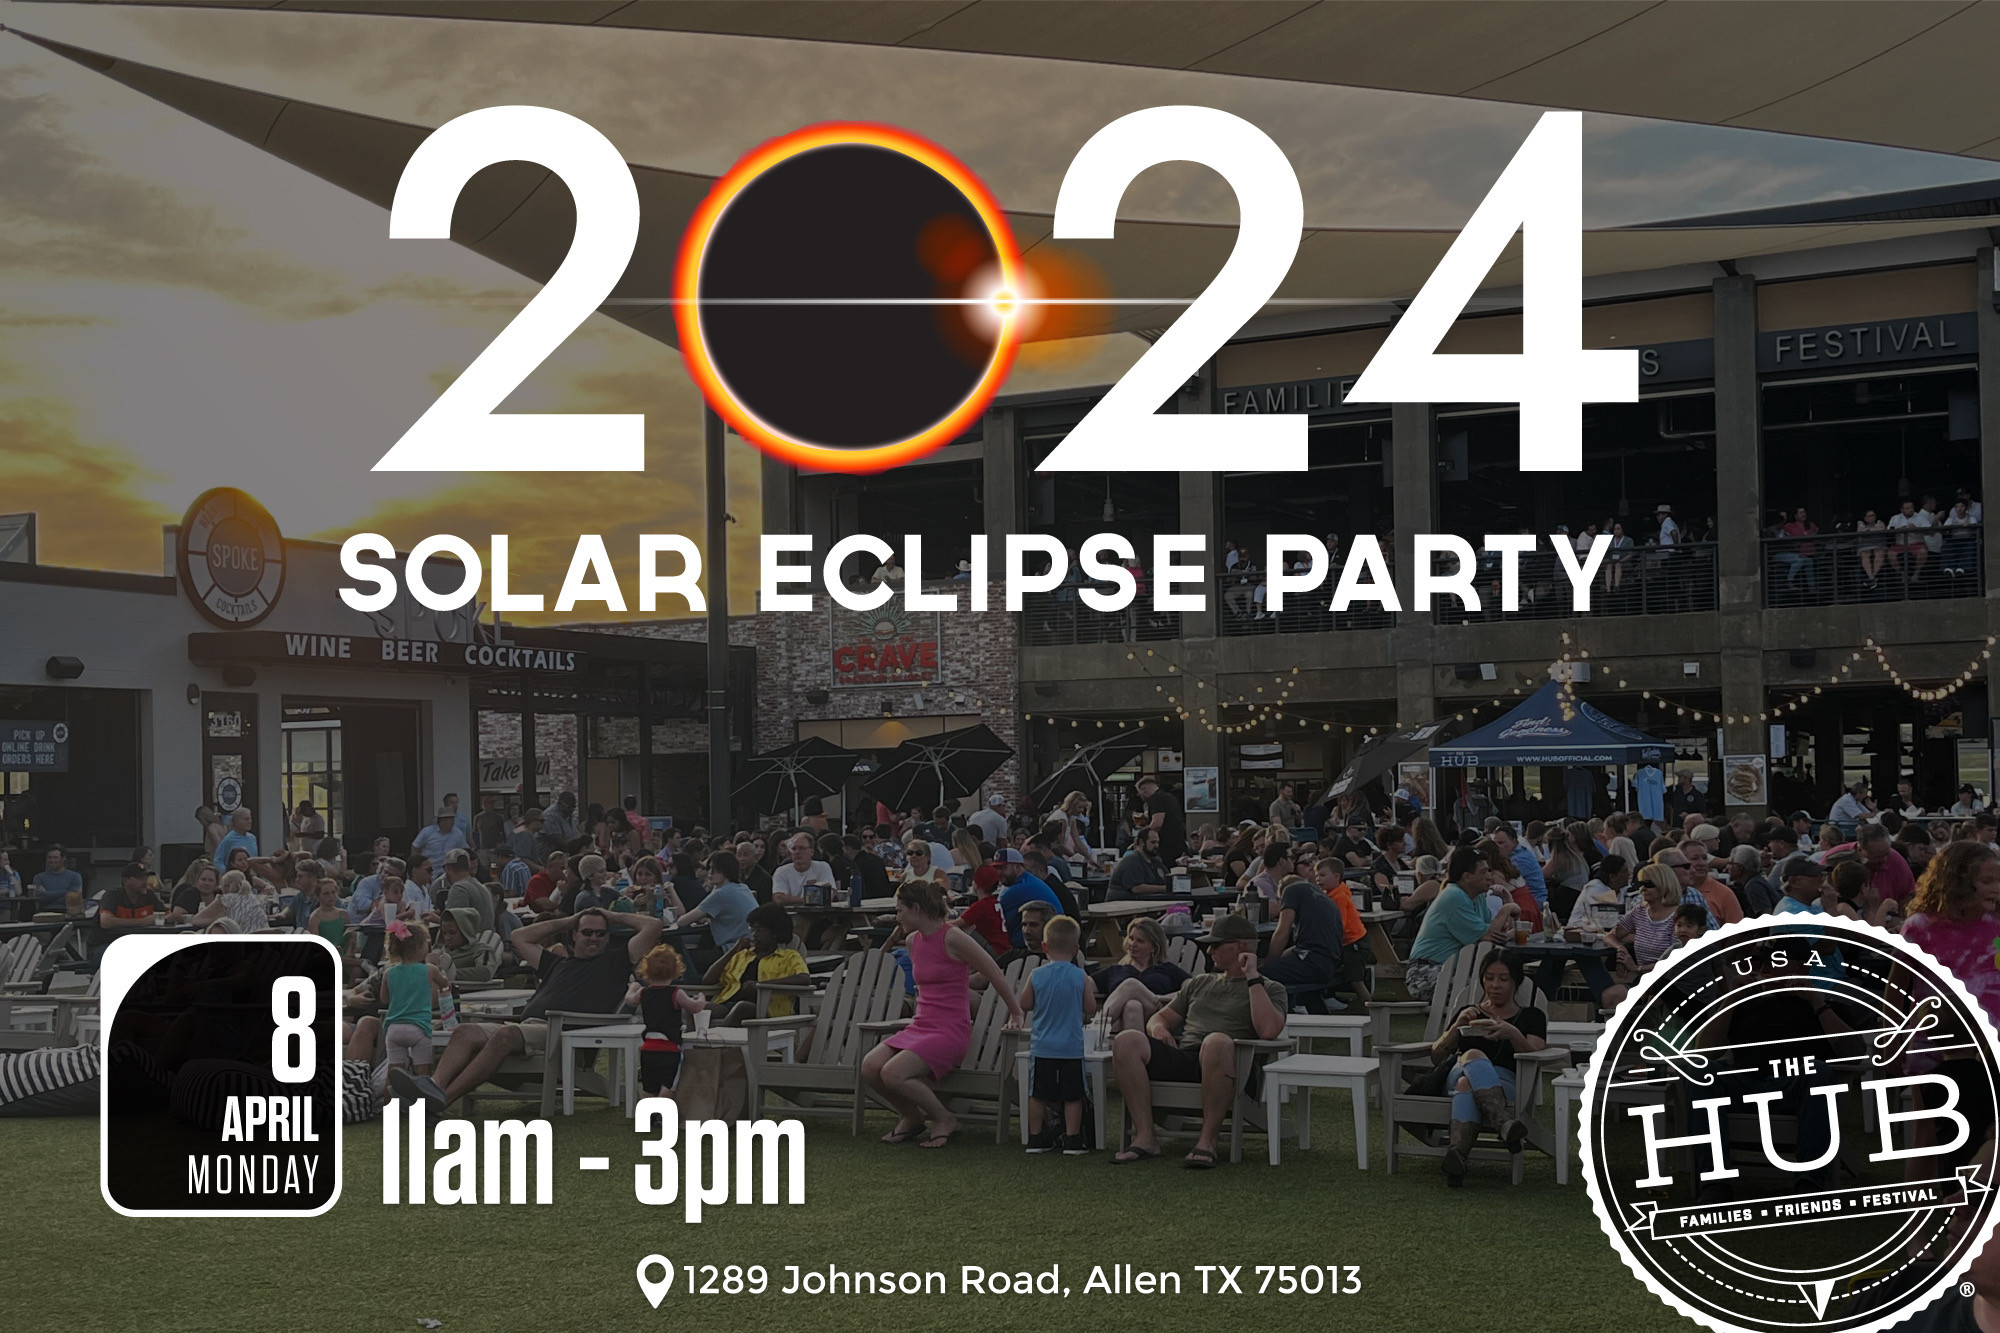 The HUB graphics for solar eclipse